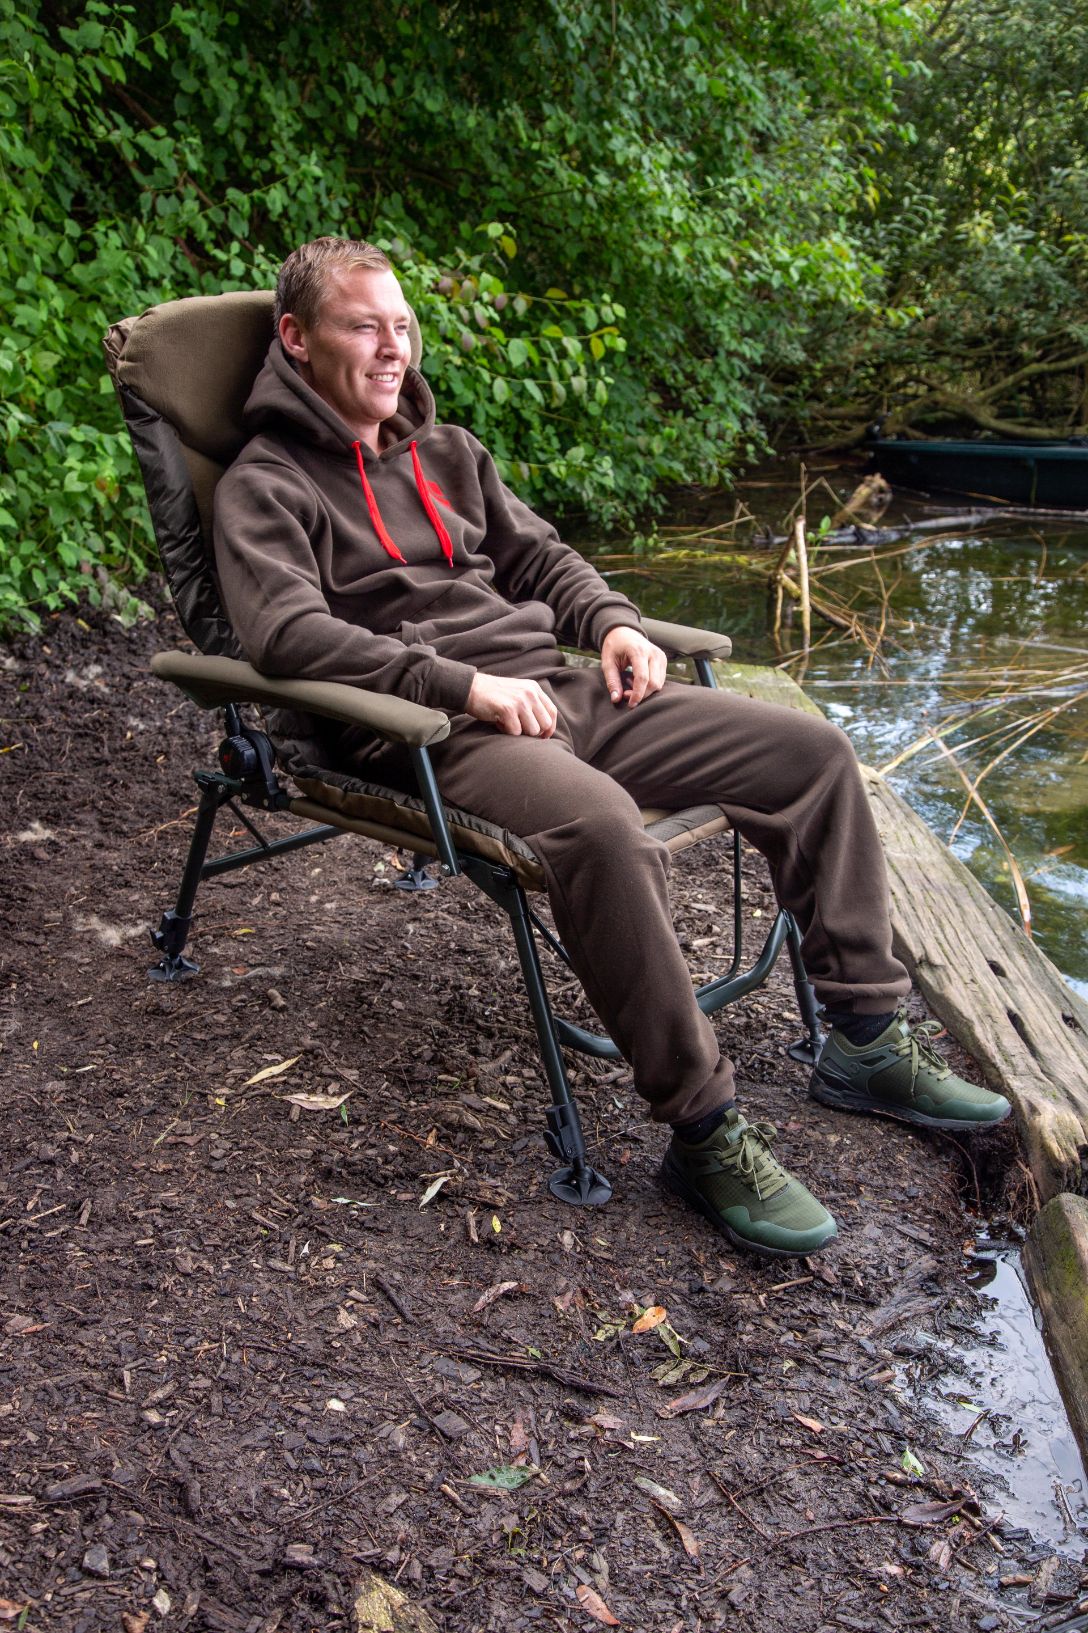 Ultimate Arm Carp Chair Deluxe